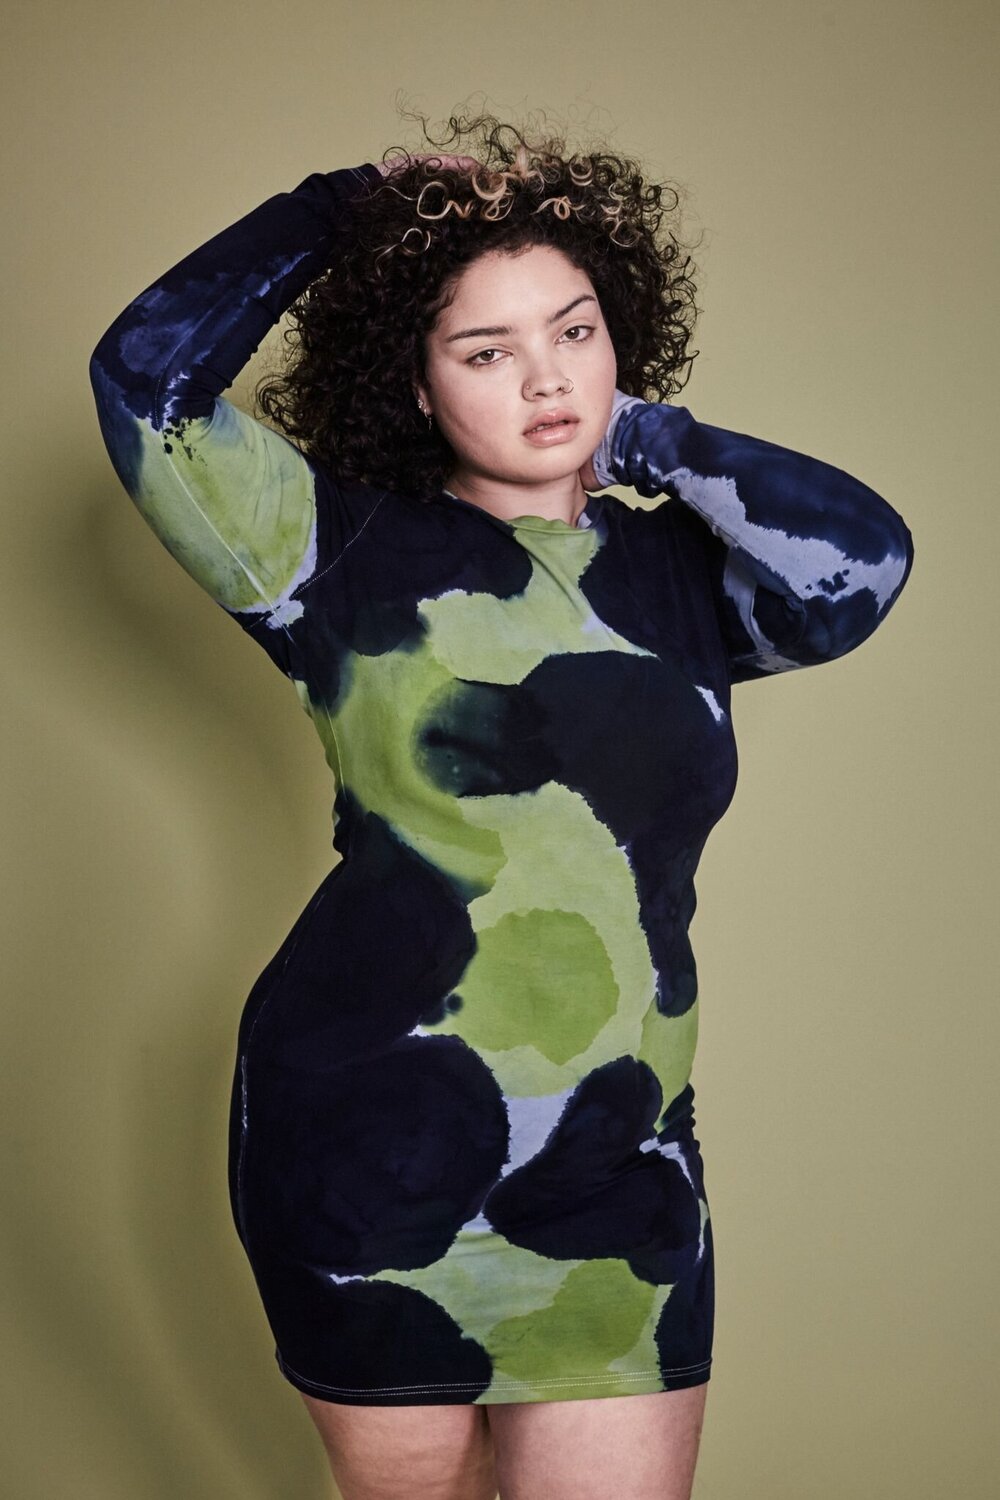  - “At the heart of what we do is an intention that we, and our clients, are meaningfully engaged with culture and community. We would describe our business as values driven, in everything we do we consider inclusivity, diversity, equality and sustainability.”IMAGE | Gary Bigeni, Tie Dye Capsule Collection, Mini Dress